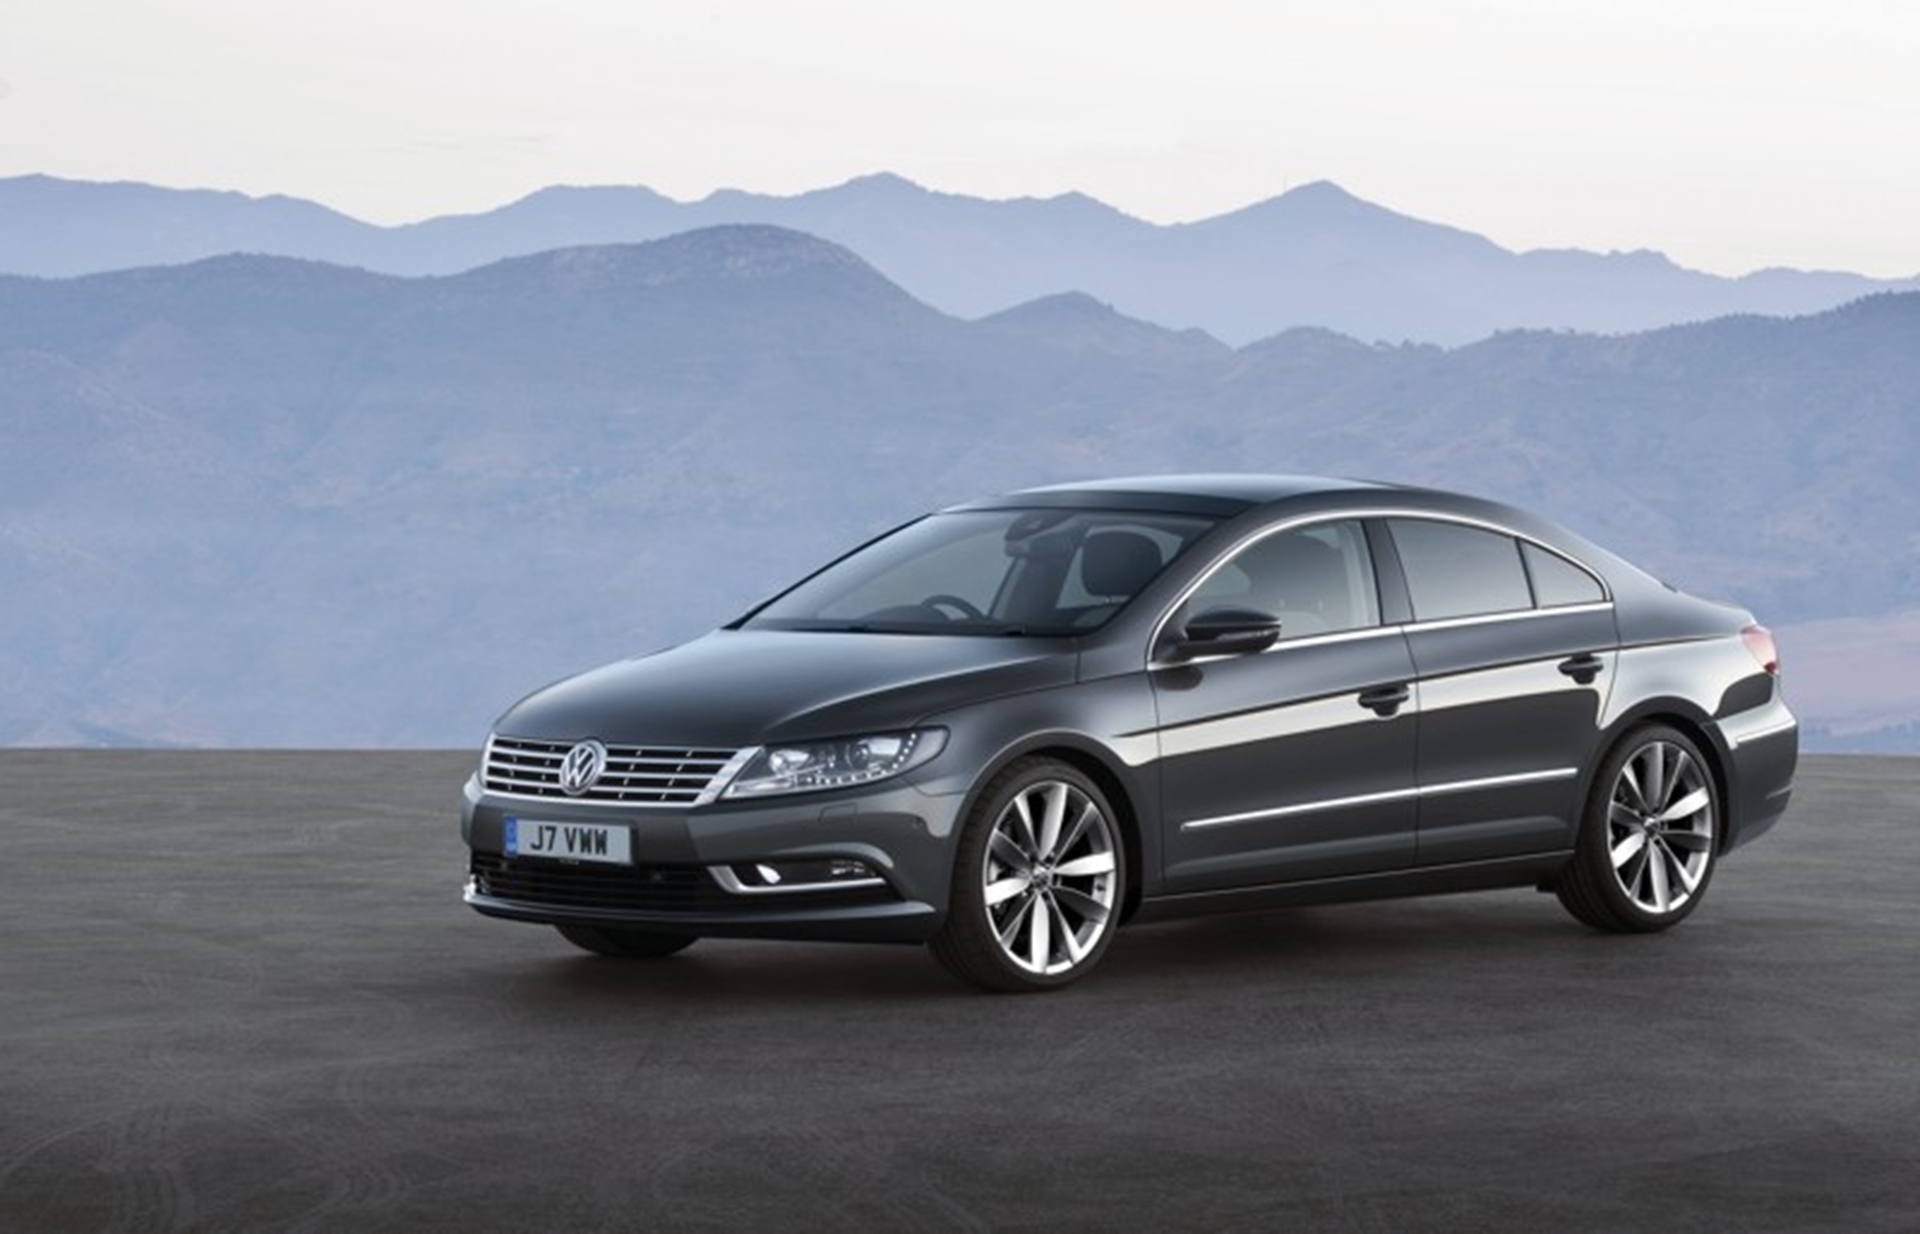 NEW VOLKSWAGEN CC LUXURY MOTORING WITHOUT THE LUXURY PRICETAG